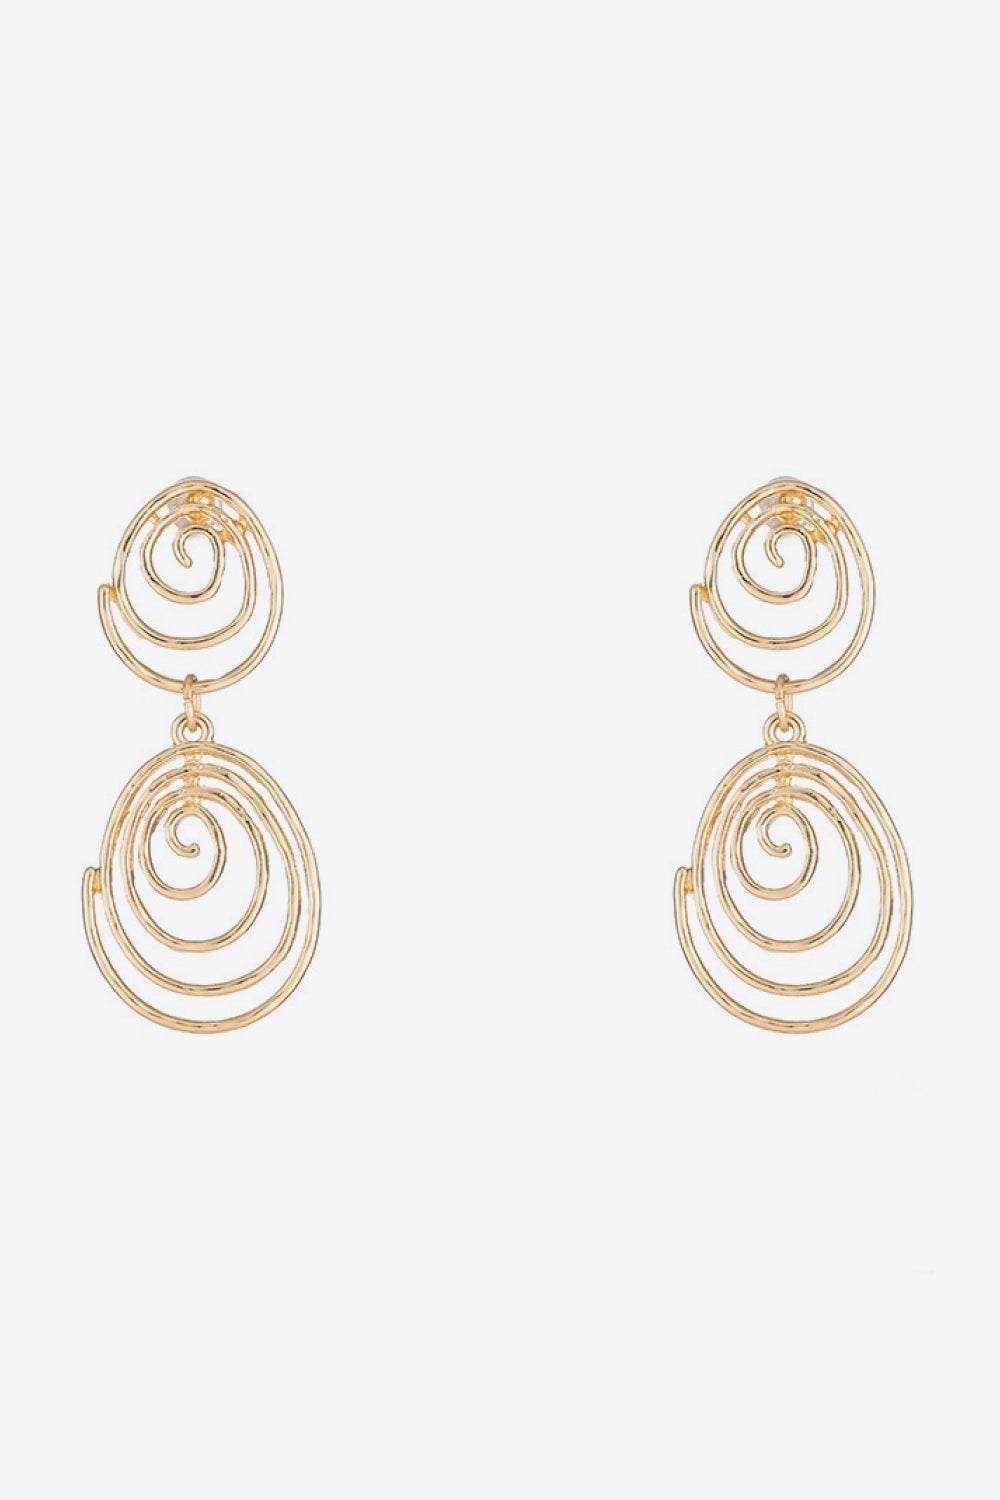 White Smoke 18K Gold-Plated Alloy Spiral Earrings Sentient Beauty Fashions